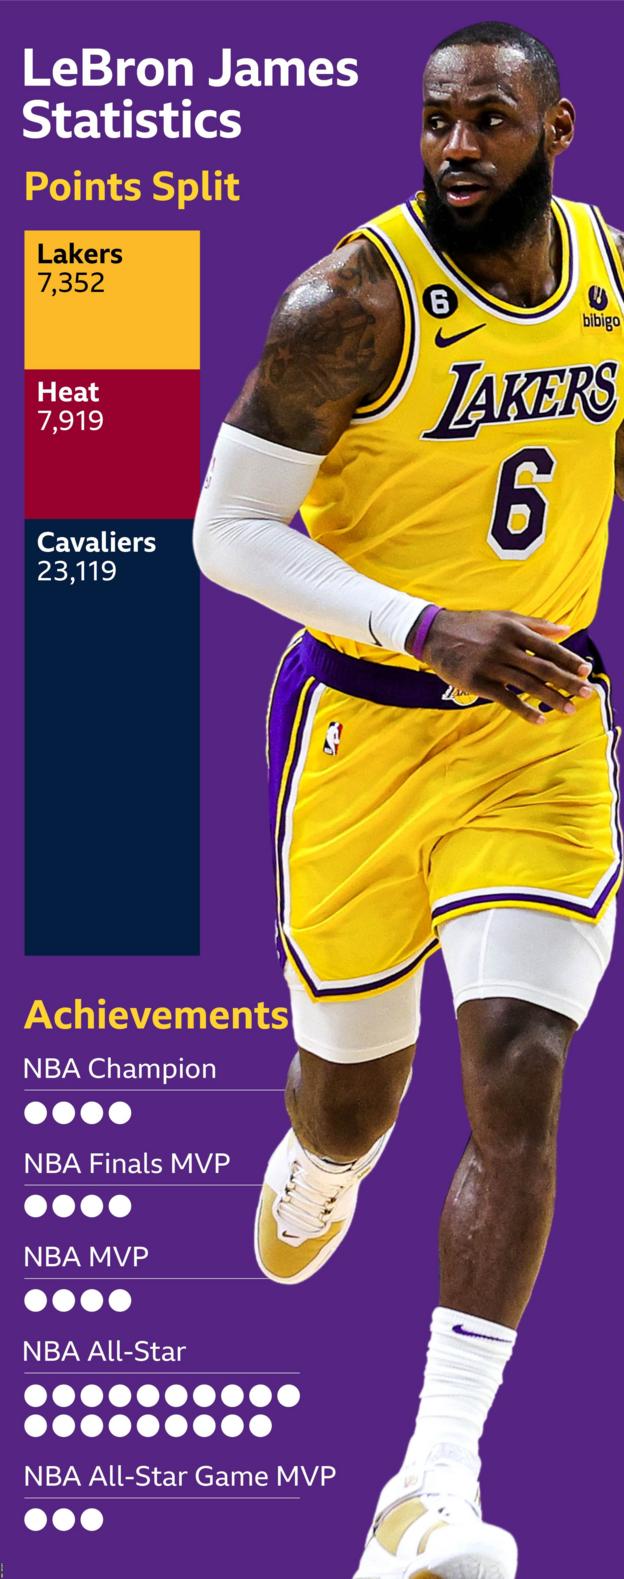 Graphic showing the points Lebron James has scored for his three franchises and his achievements